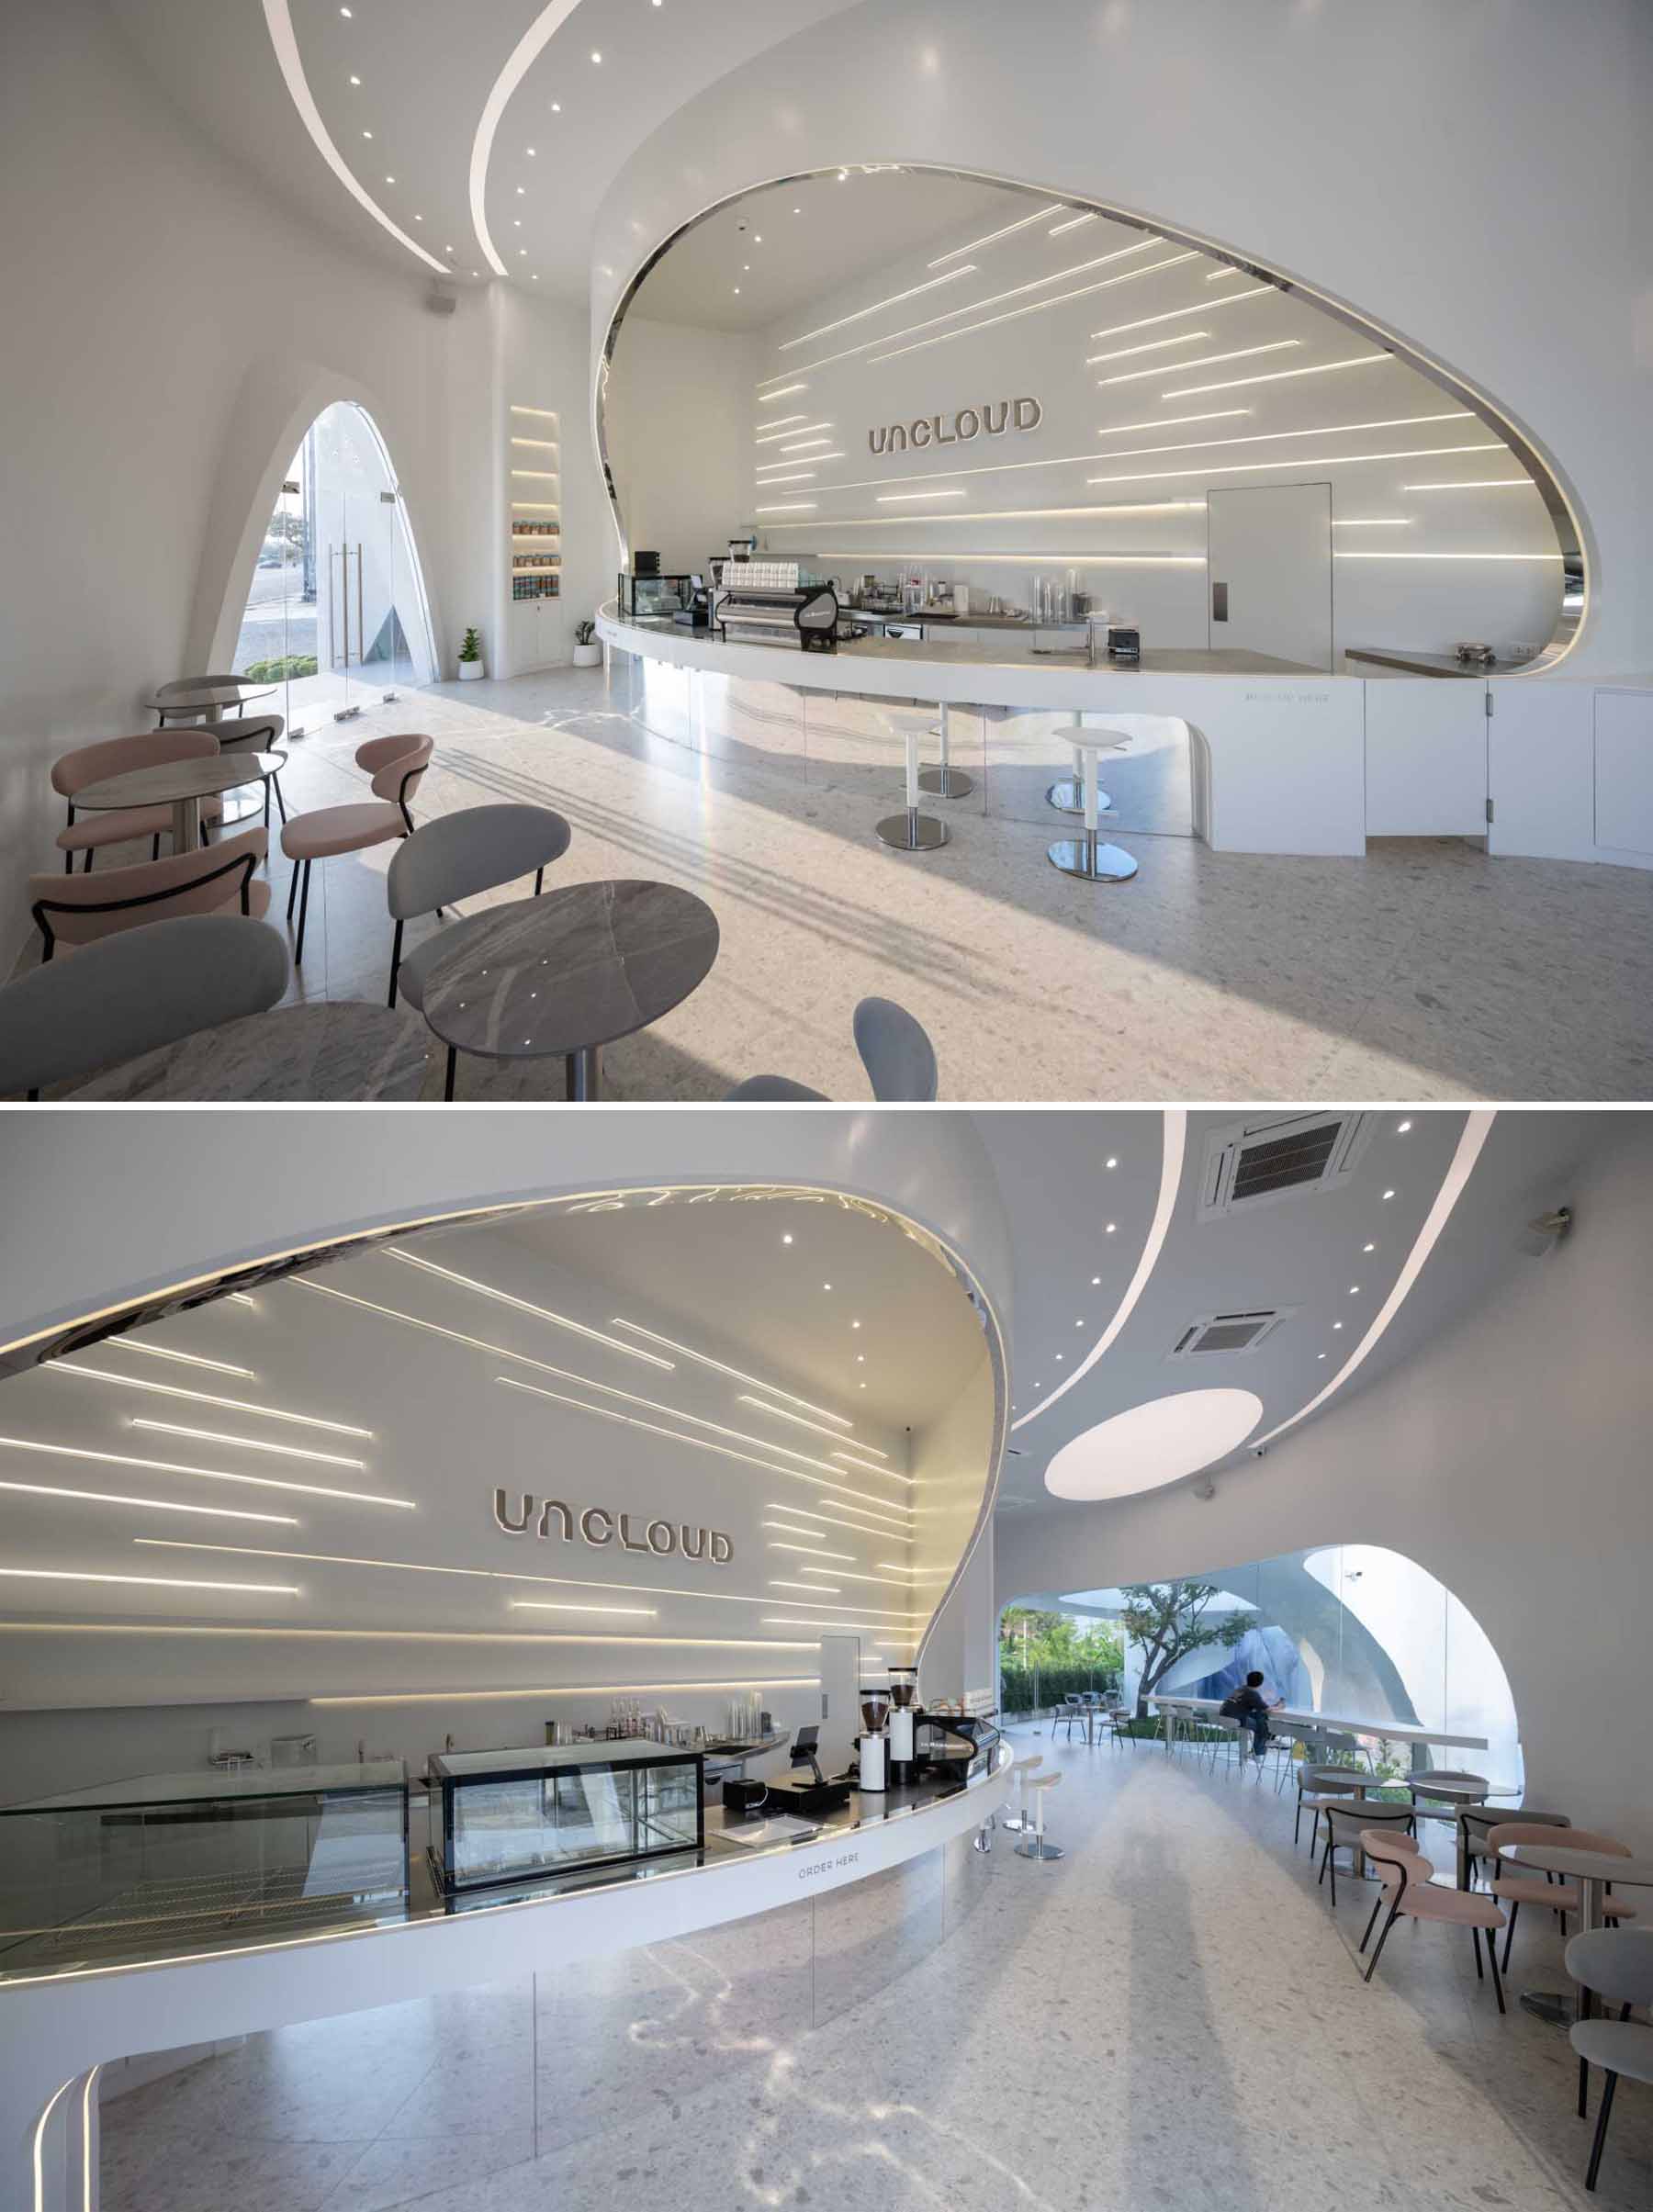 A modern coffee shop where LED lighting highlights the curves and seating areas.